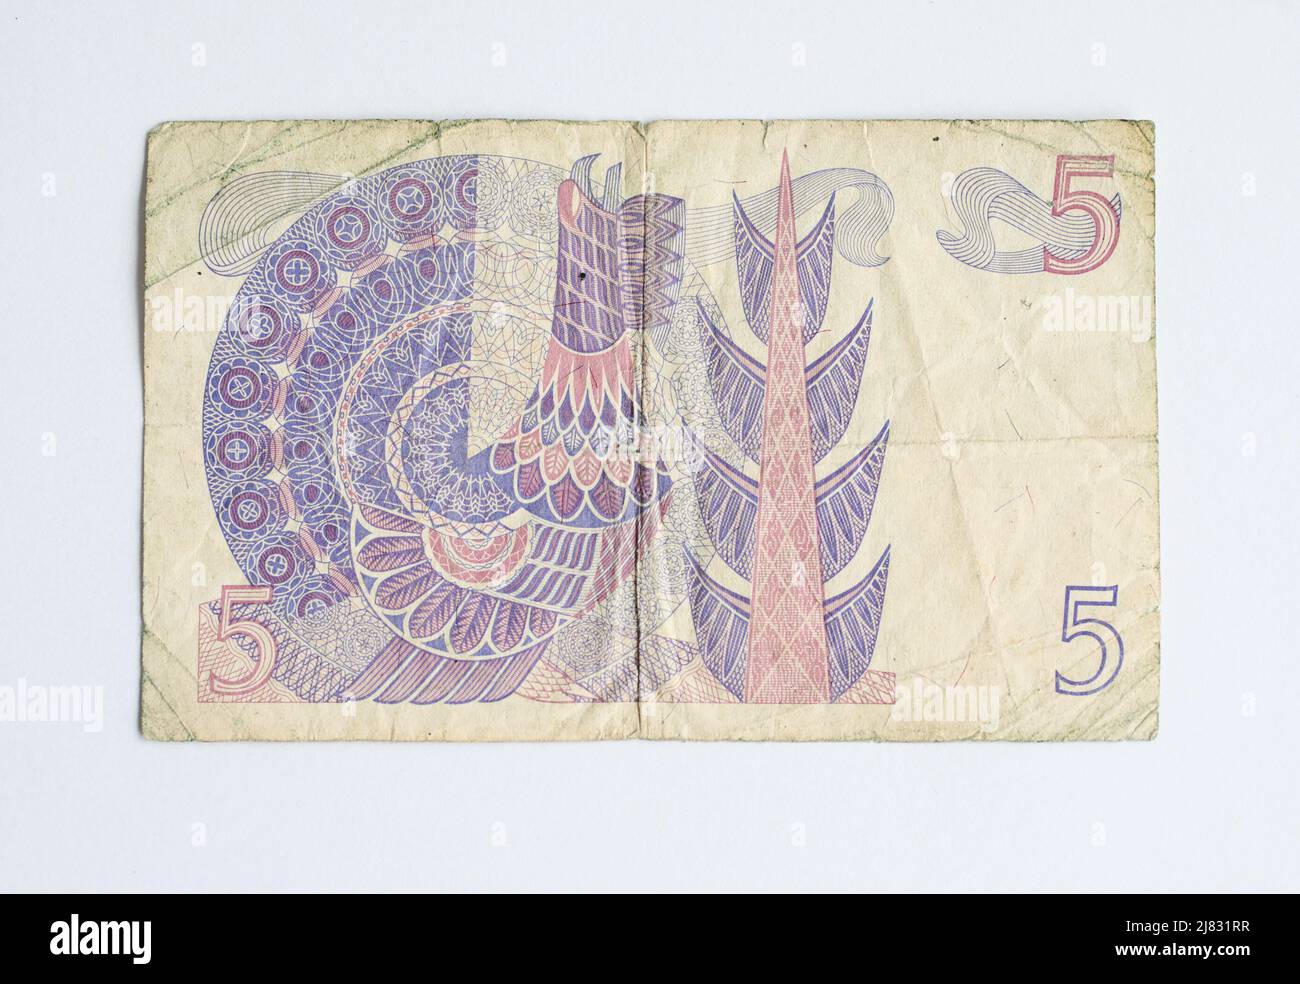 An old 5 kronor banknote, from 1979. Stock Photo